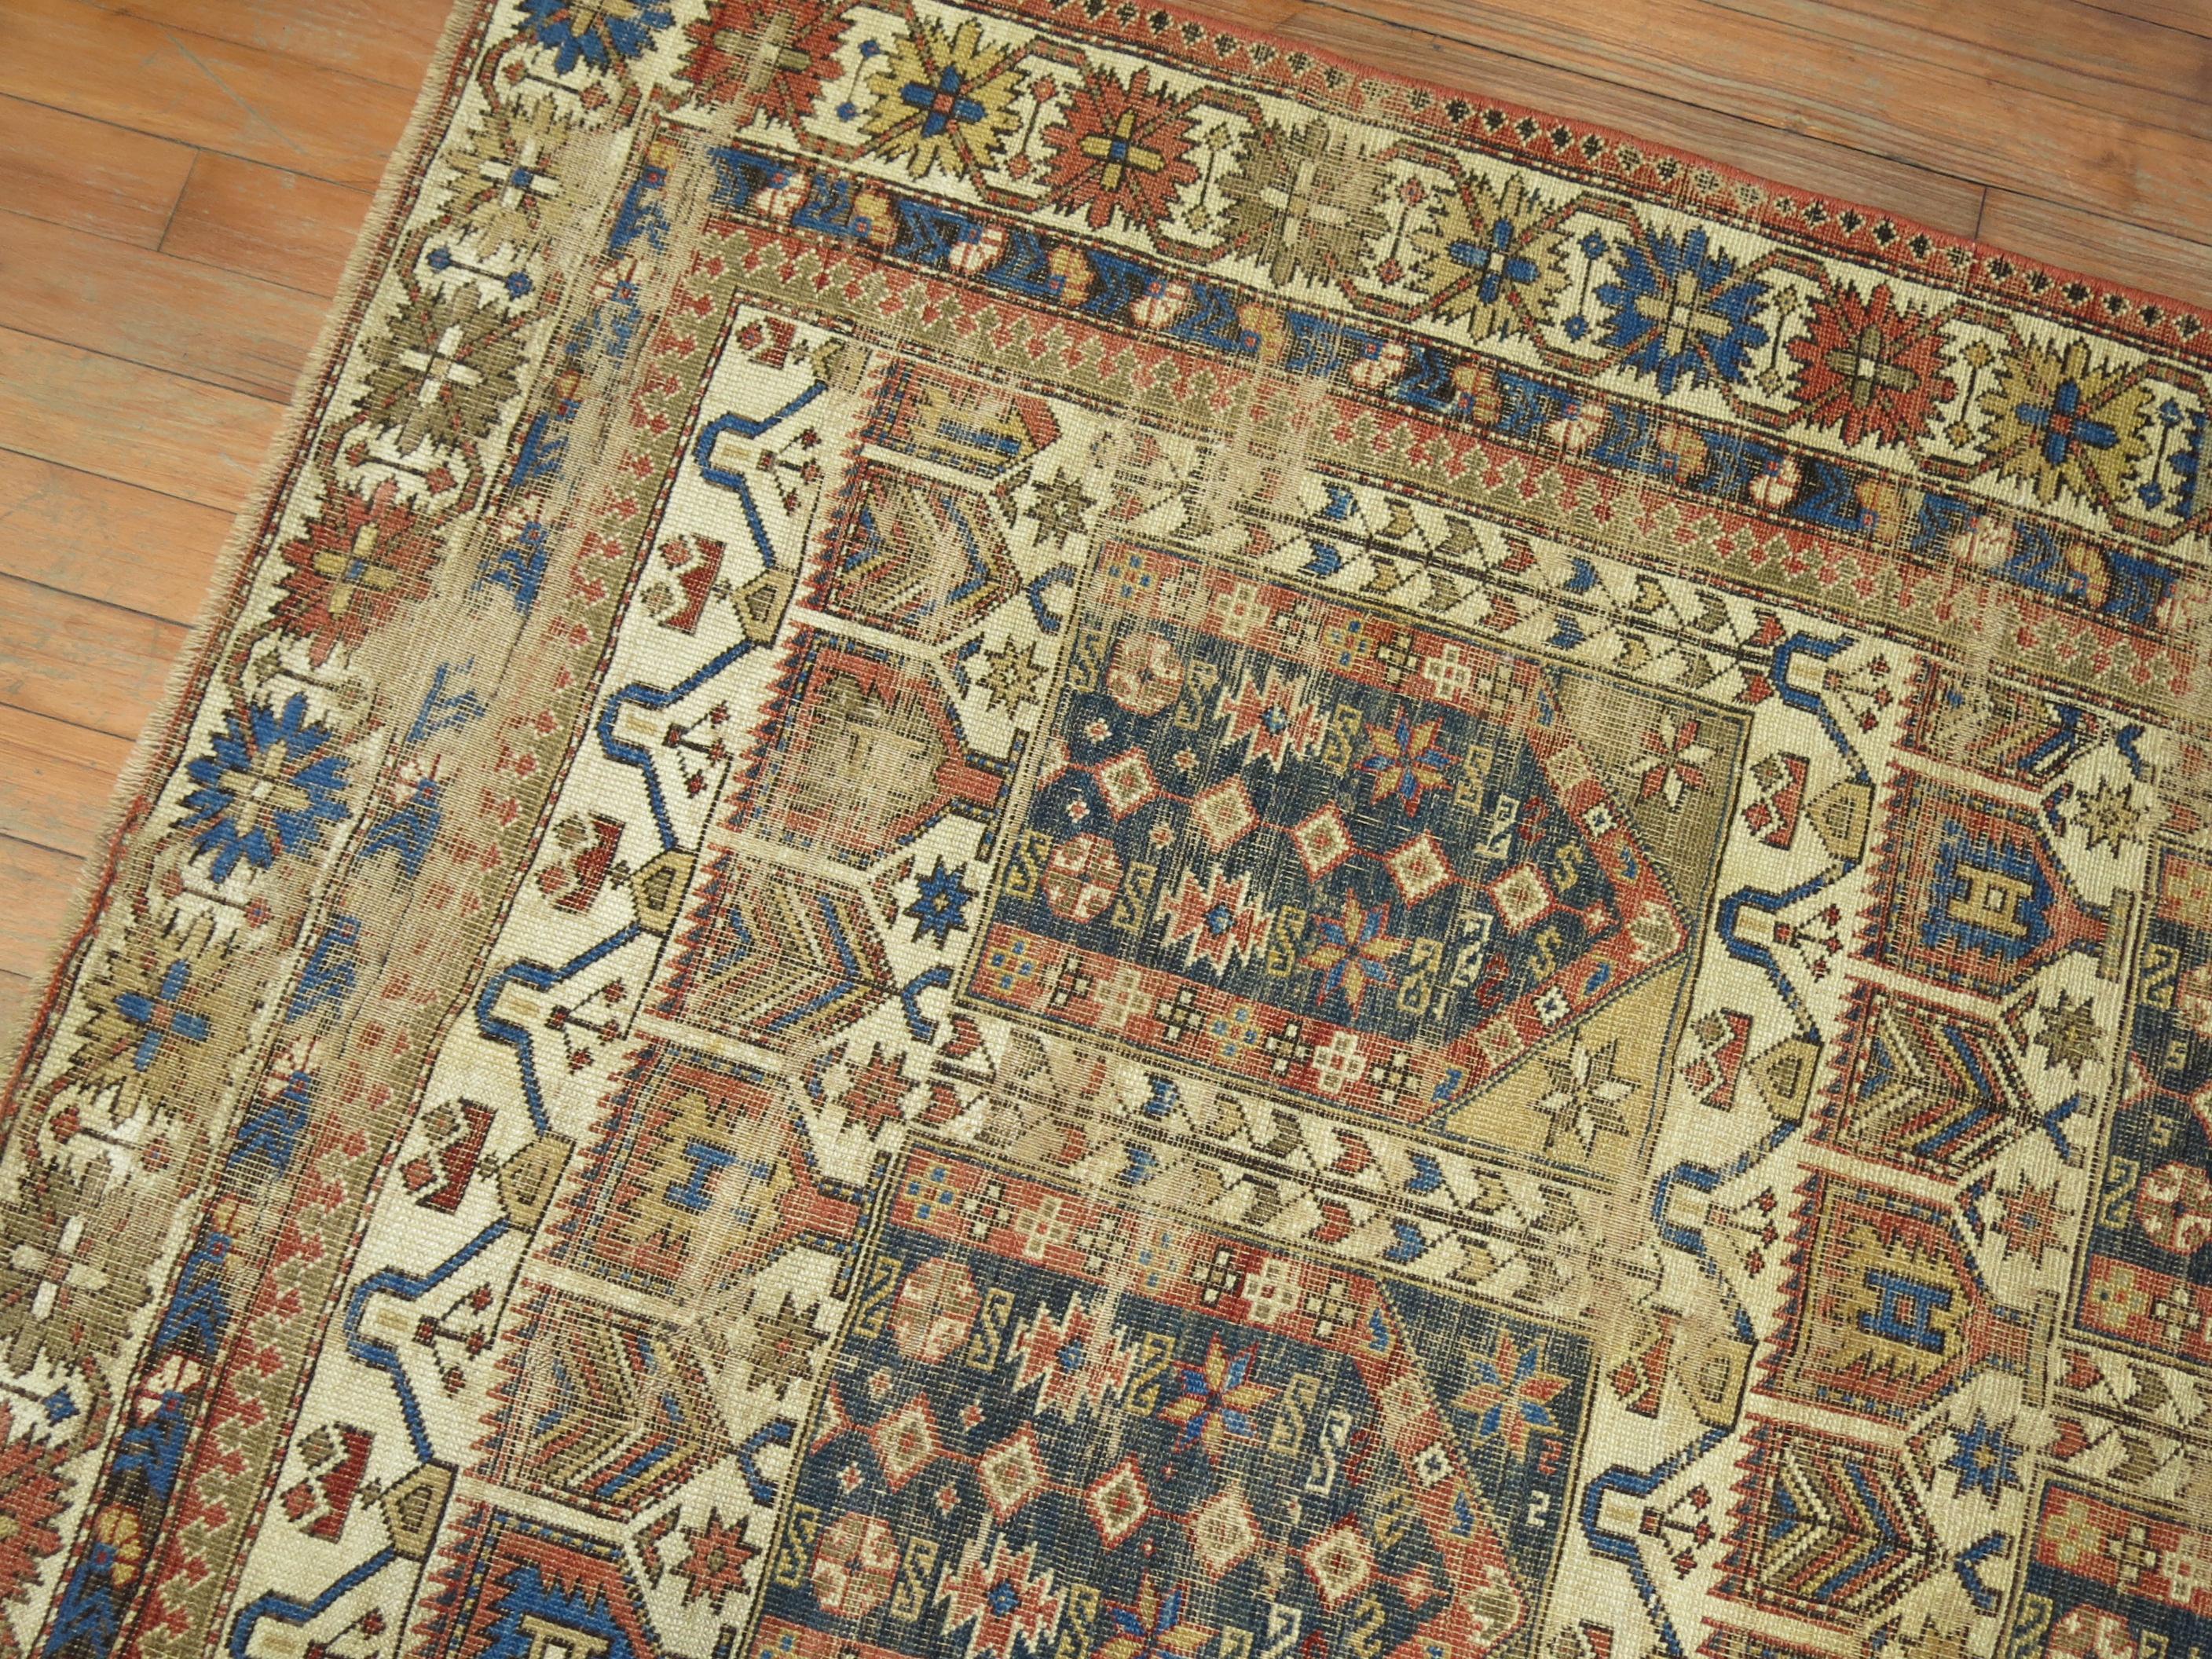 Throw size worn late 19th century Caucasian 3 x 5 rug in earthy palette. Rust, navy, Classic cluue, ivory. The wear is even throughout,

circa 1910, measures: 3'7